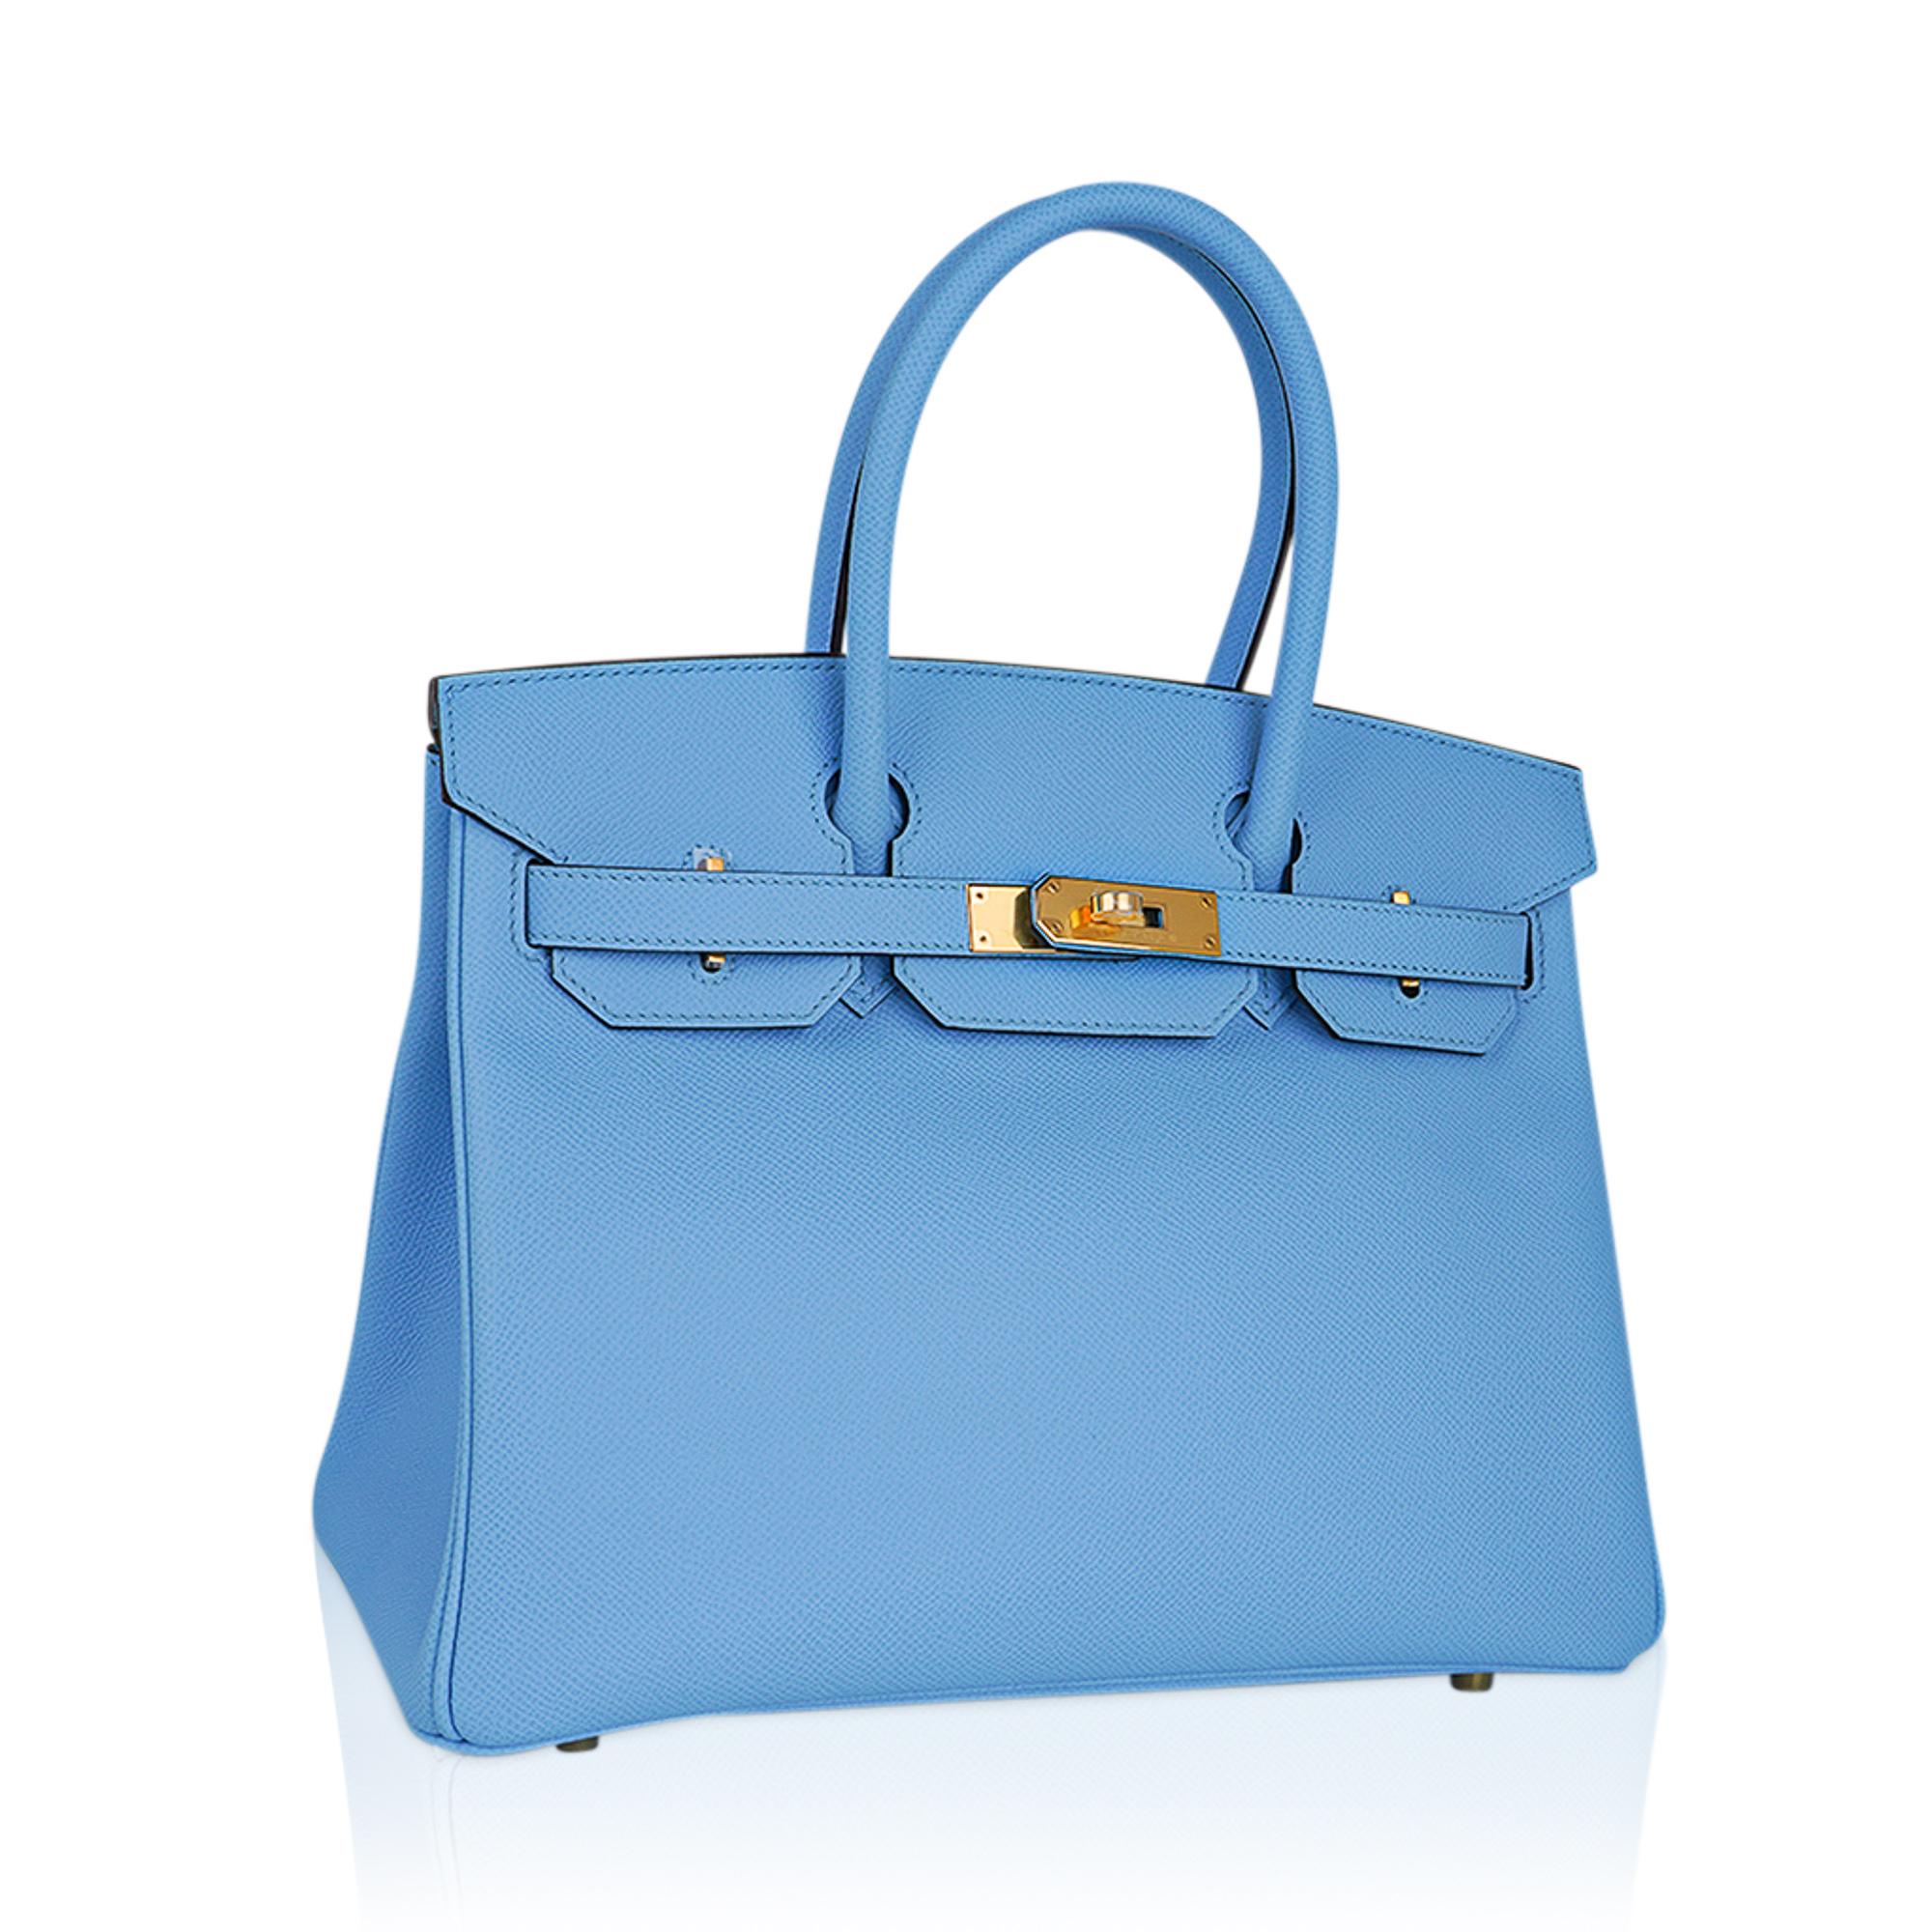 Mightychic offers an Hermes Birkin 30 bag featured in rare Blue Celeste.
This beautiful sky blue Birkin bag is accentuated with Gold hardware.
Neutral and as stunning in winter as she is in summer.
Epsom leather which lends rich saturation of